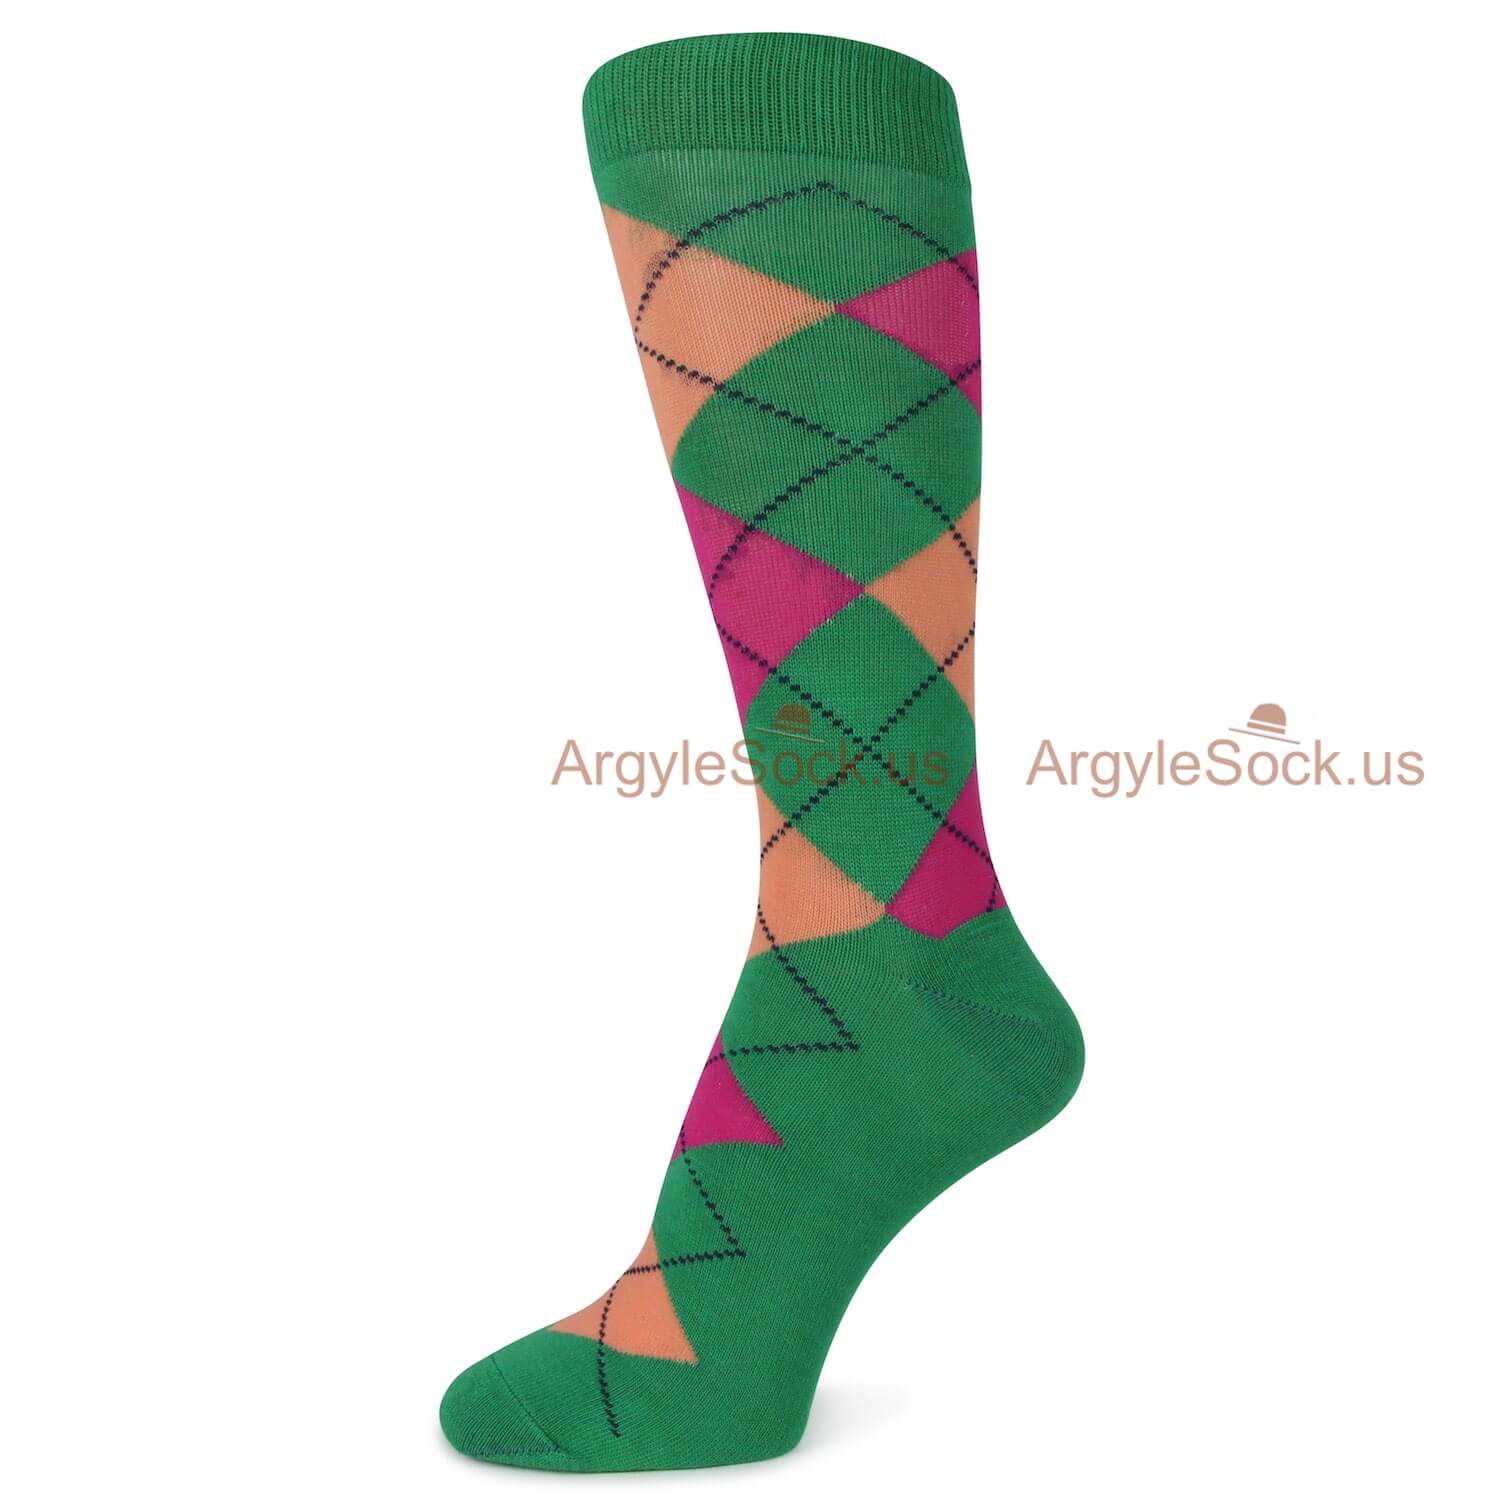 Green Peach and Pink Argyle Socks For Men